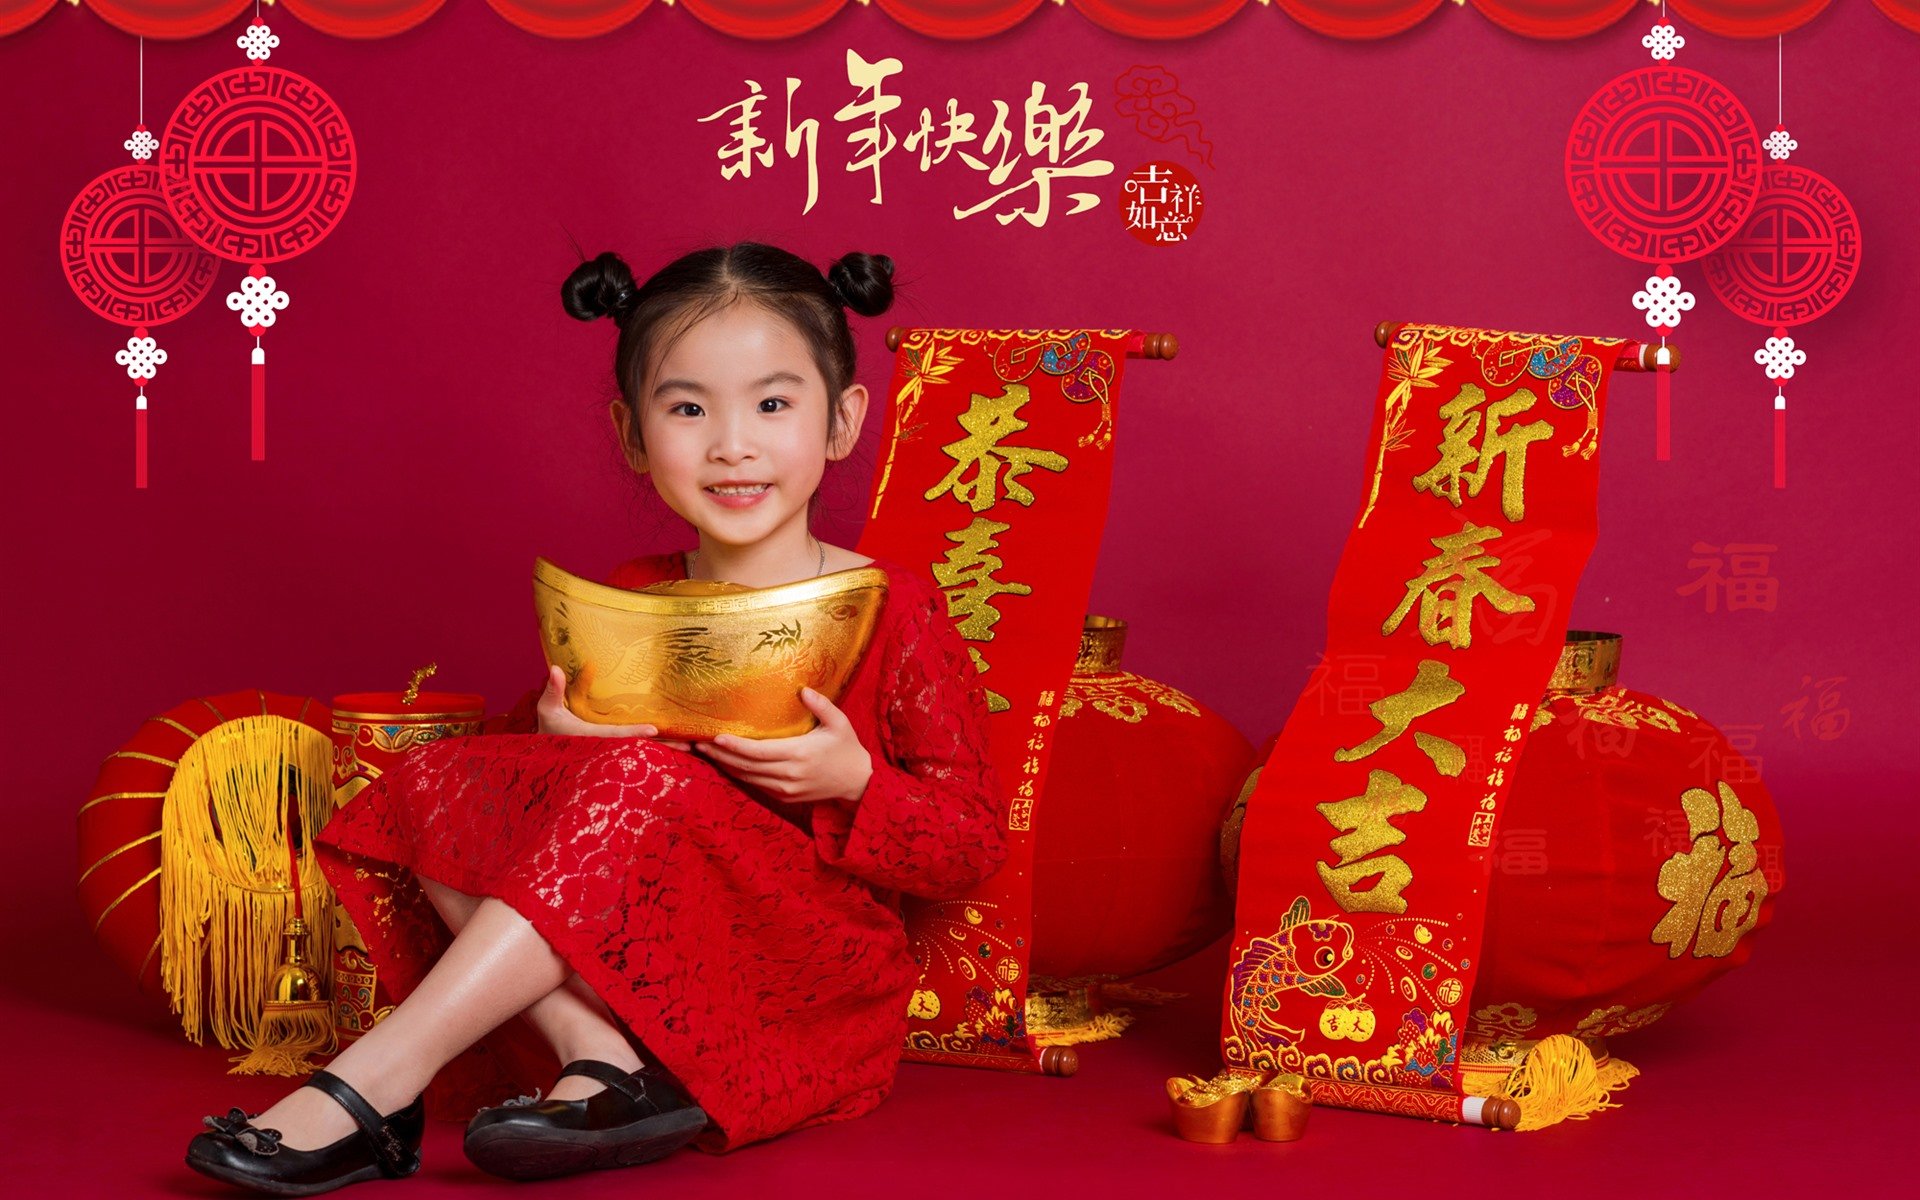 Wallpaper Happy Chinese New Year, cute little girl, red style 1920x1200 HD Picture, Image